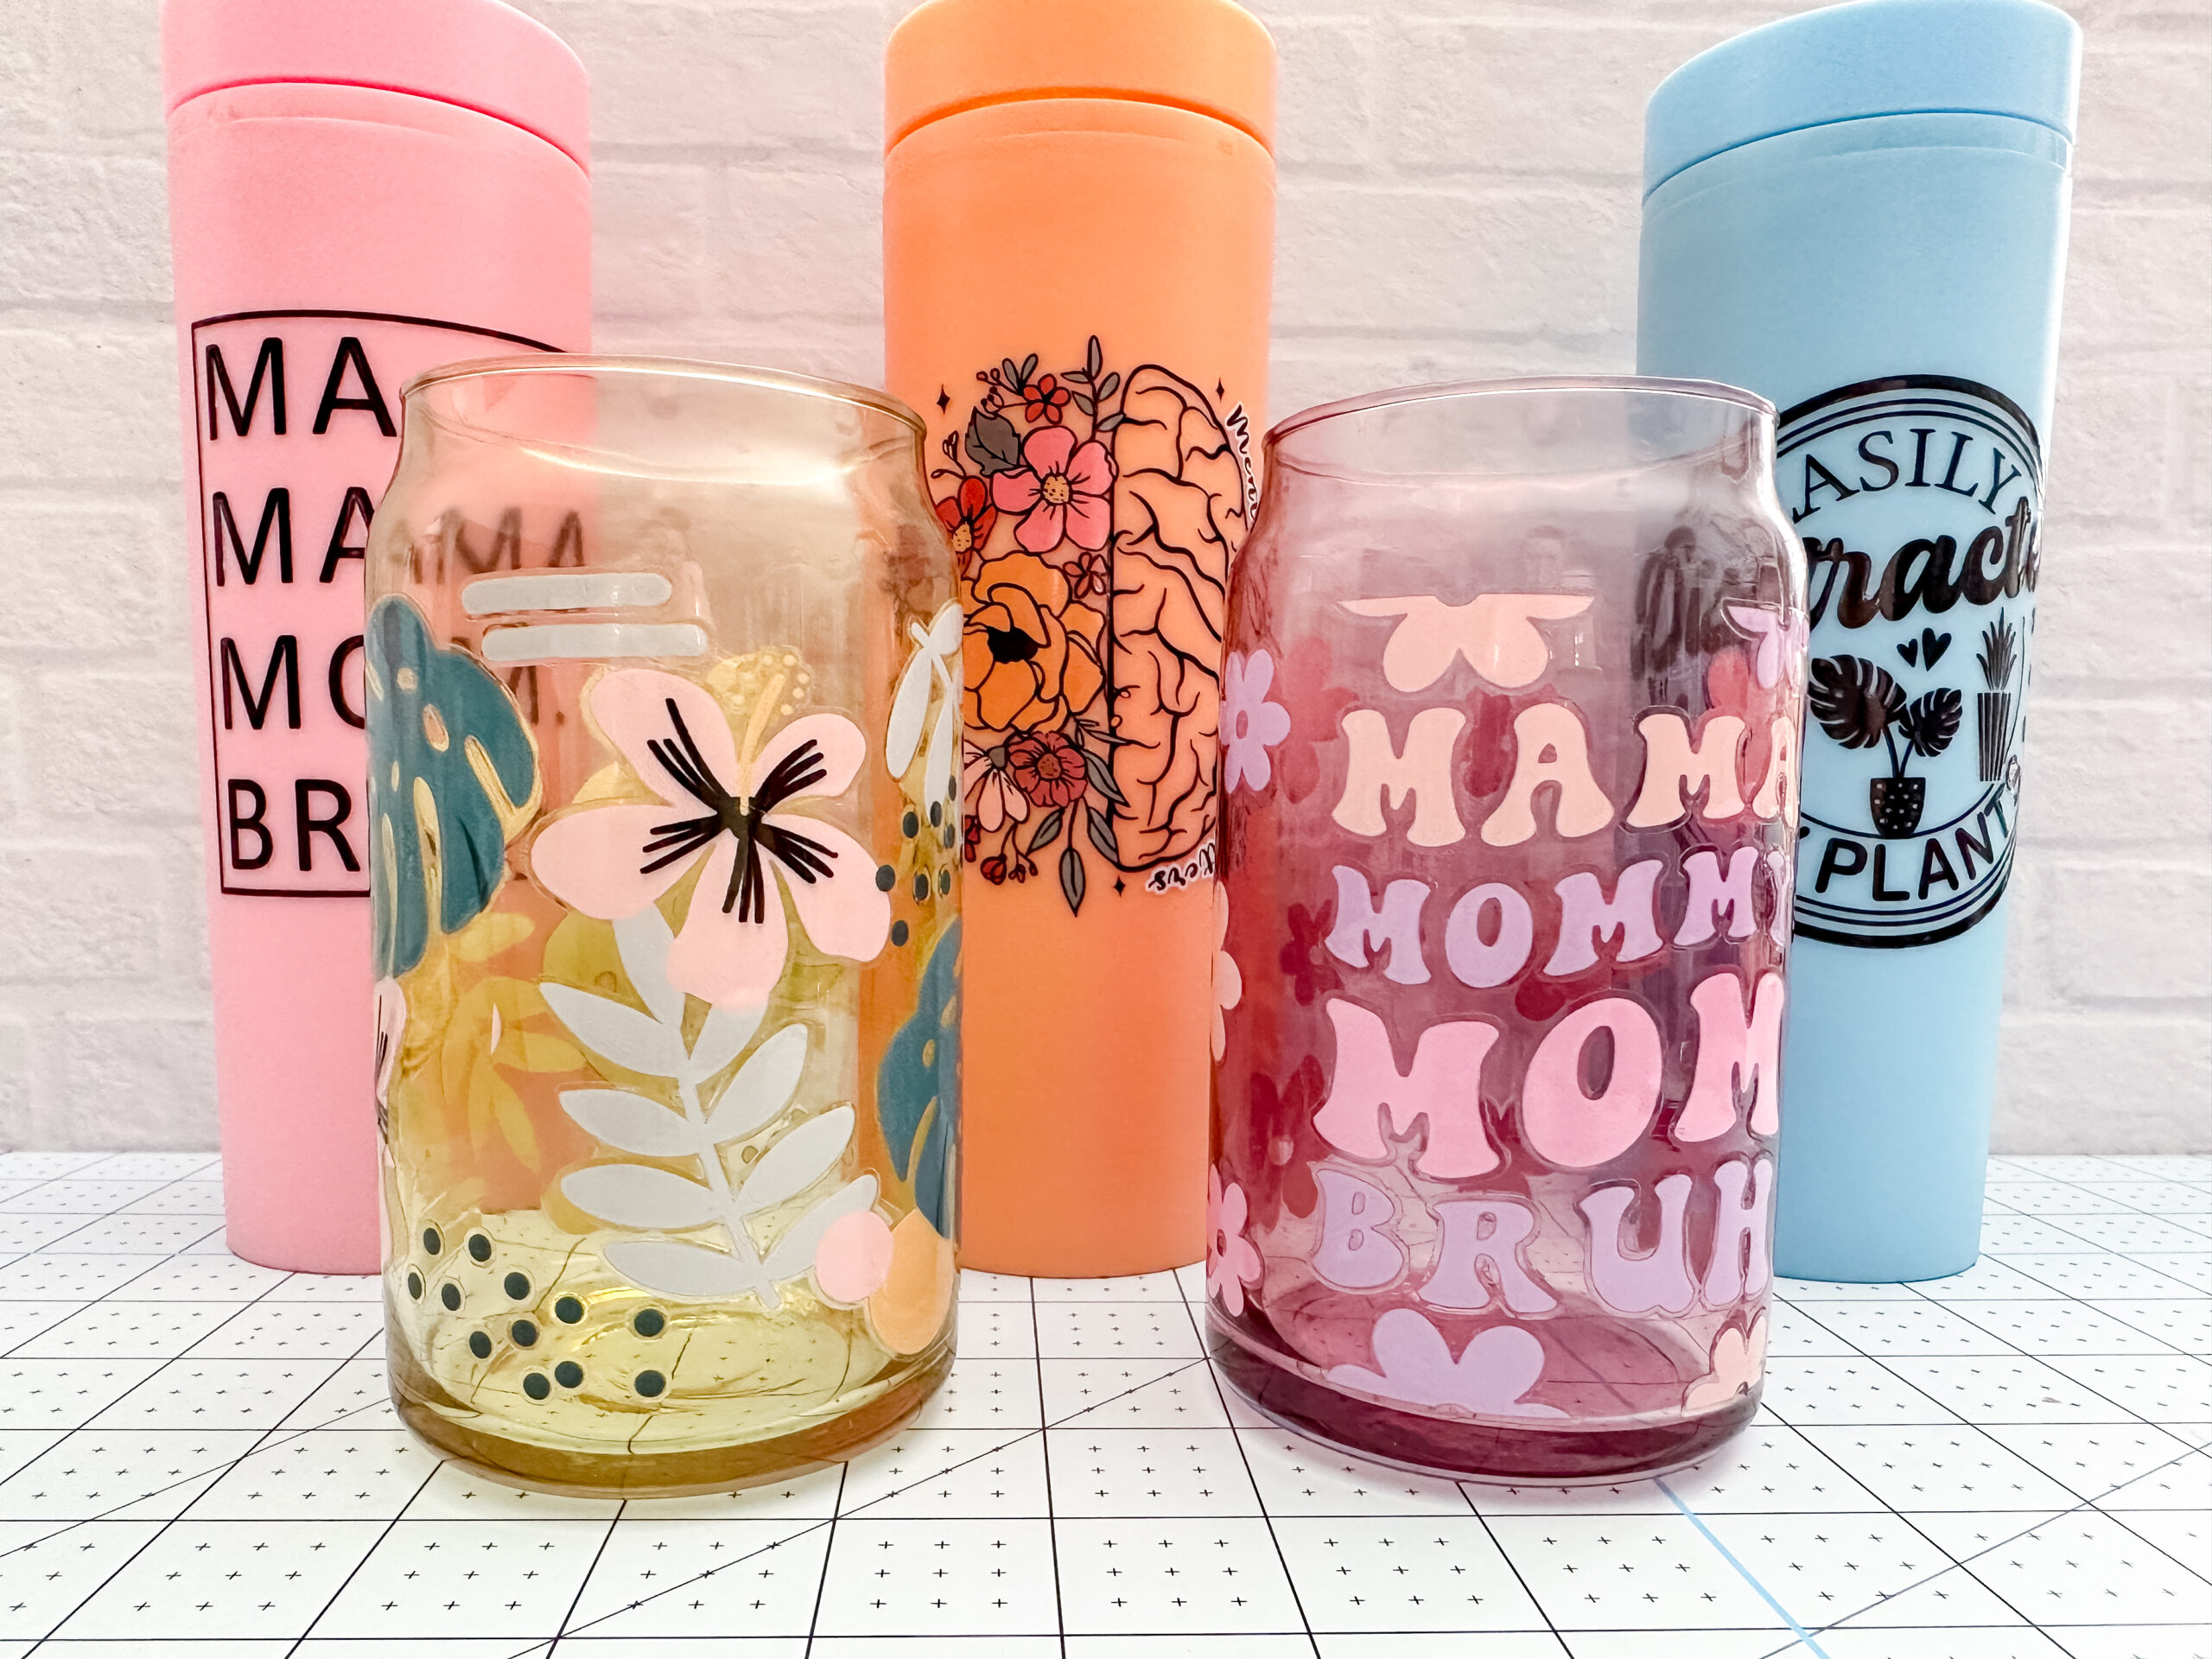 How to size and print sublimation tumbler wraps 